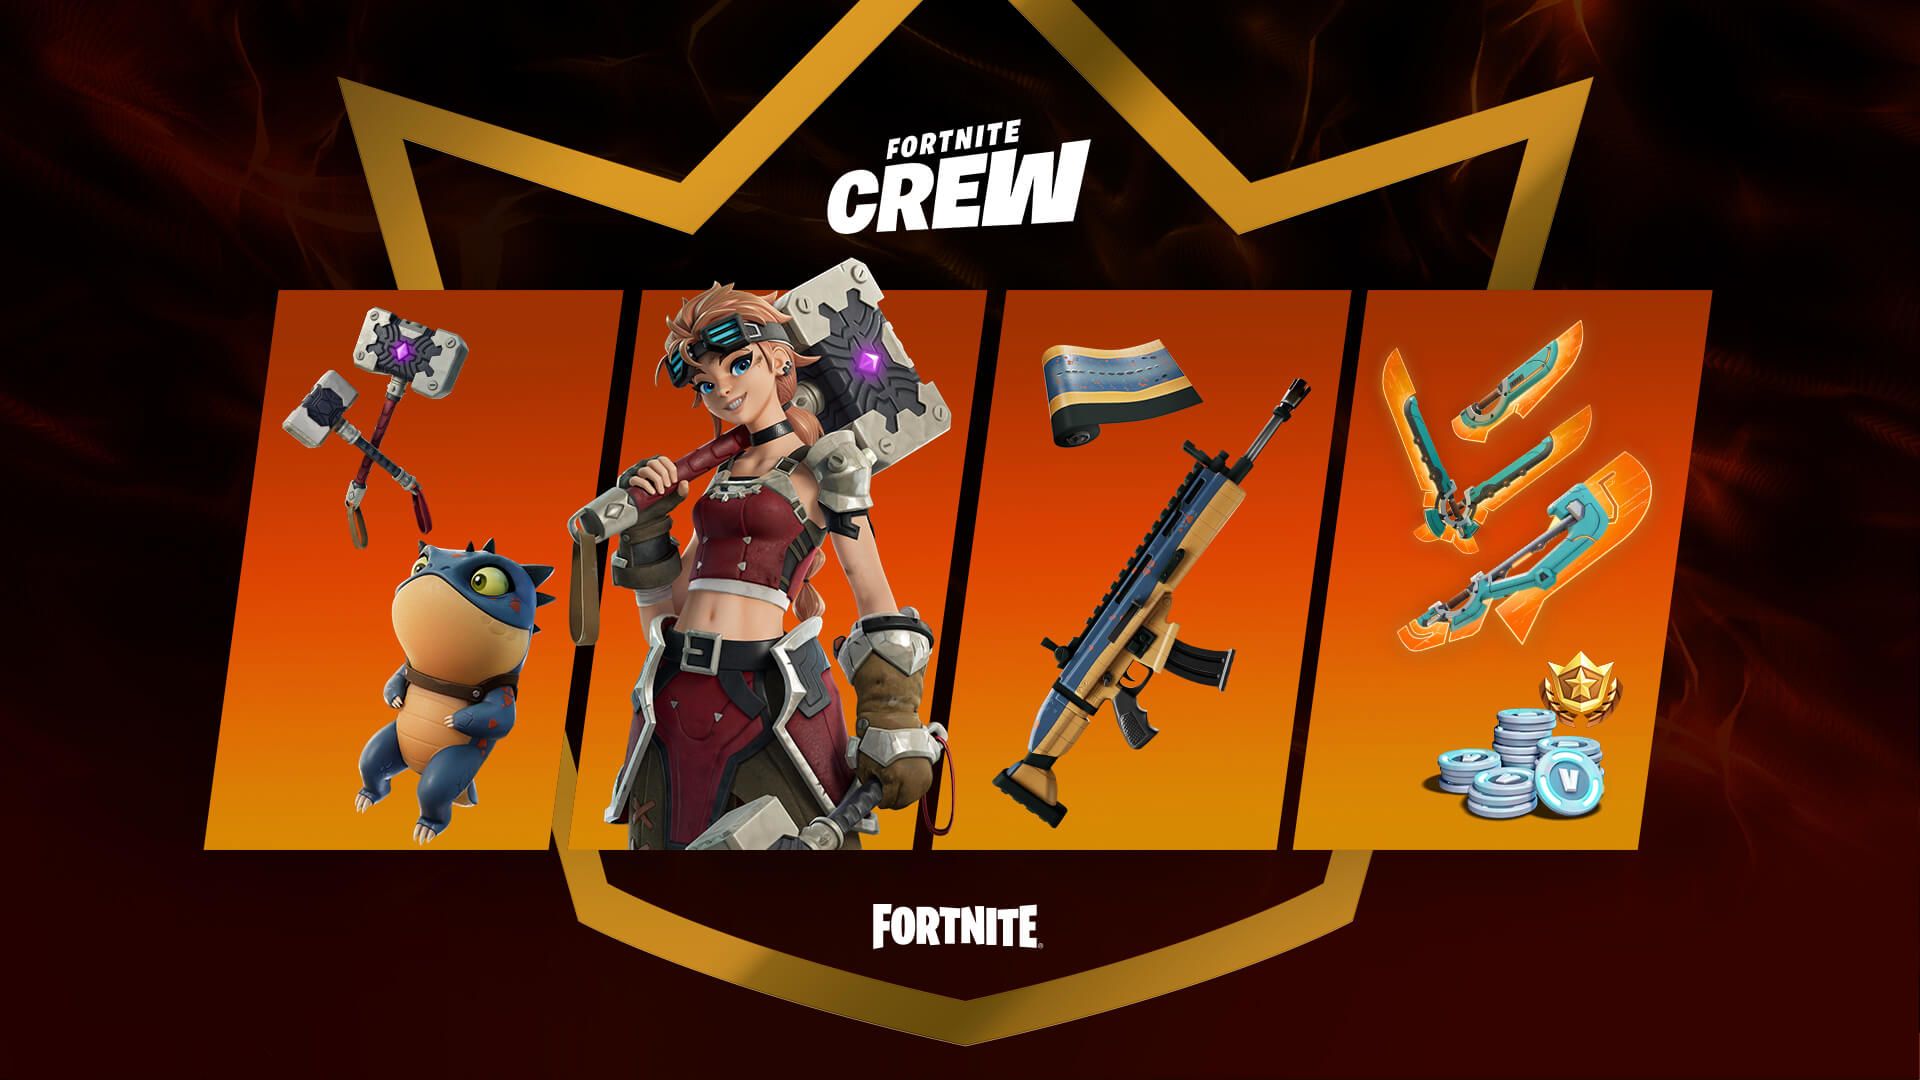 Fortnite Crew February 2023 Pack With Sylvie The Smith, Groaker, Cosmetics And Bonus Rewards